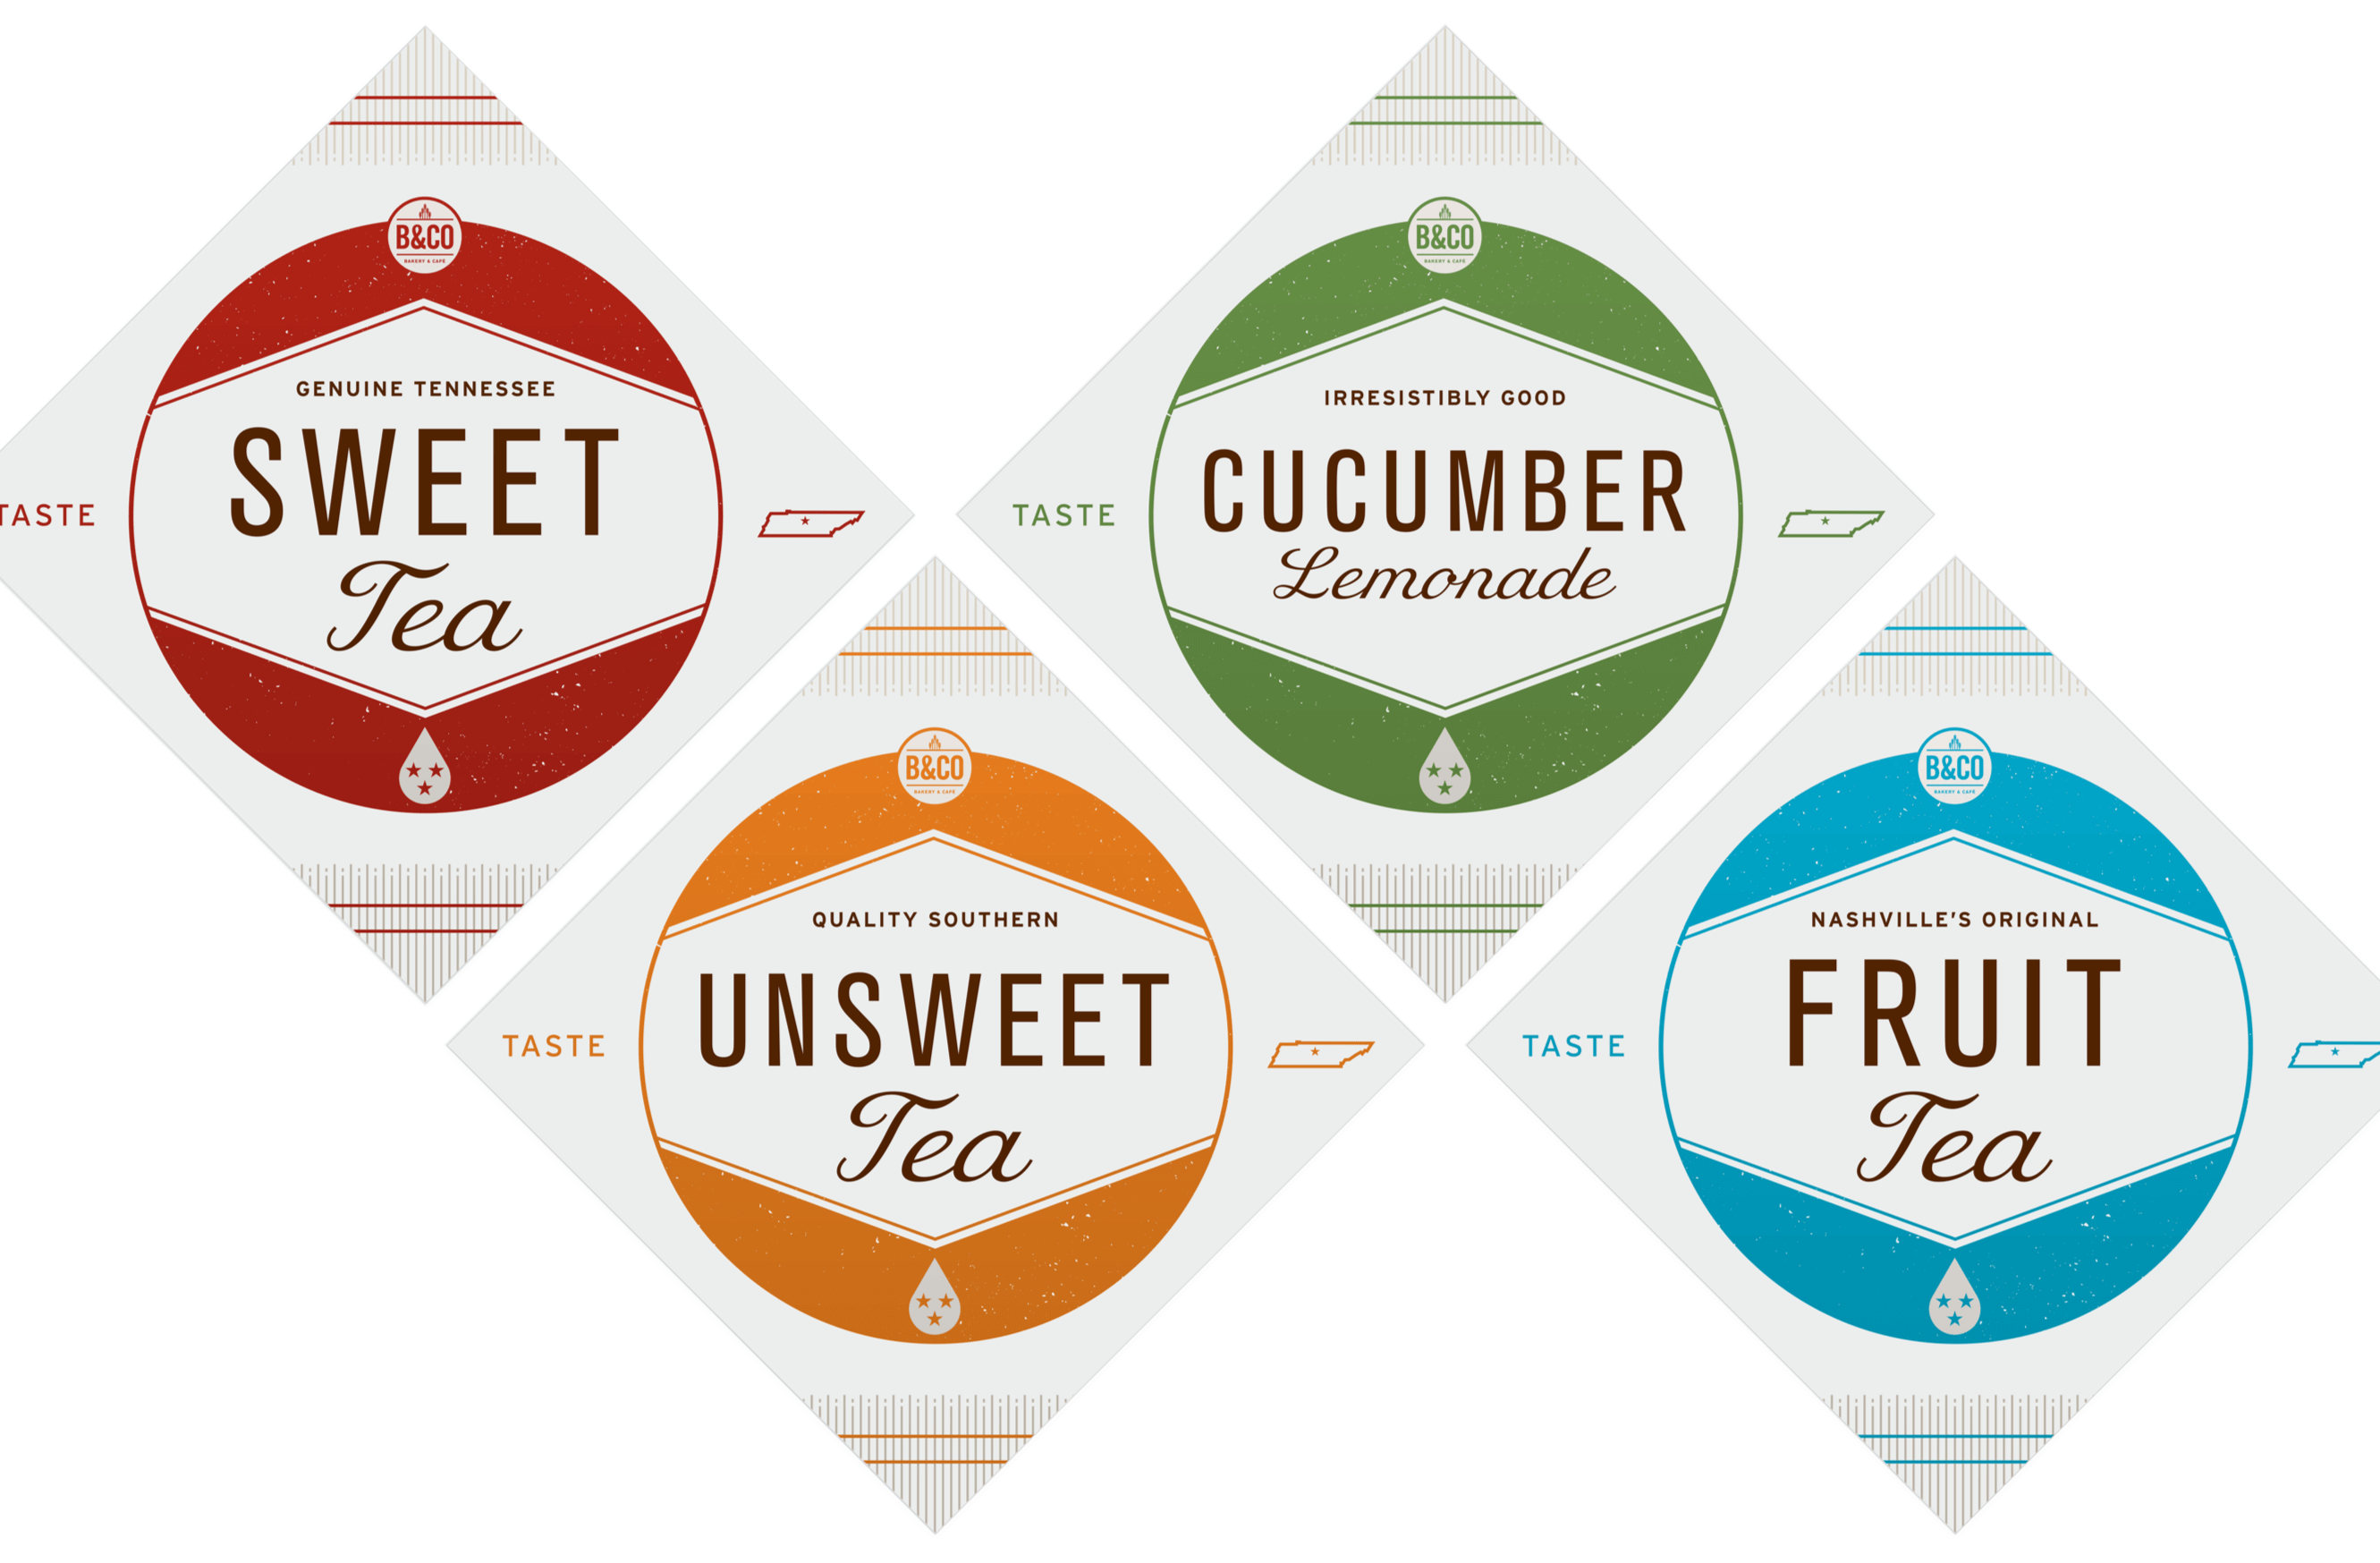 Bread & Company tea bubbler dispenser signage design for sweet, unsweet, fruit teas and cucumber lemonade for B&Co restaurant in Nashville, Tennessee